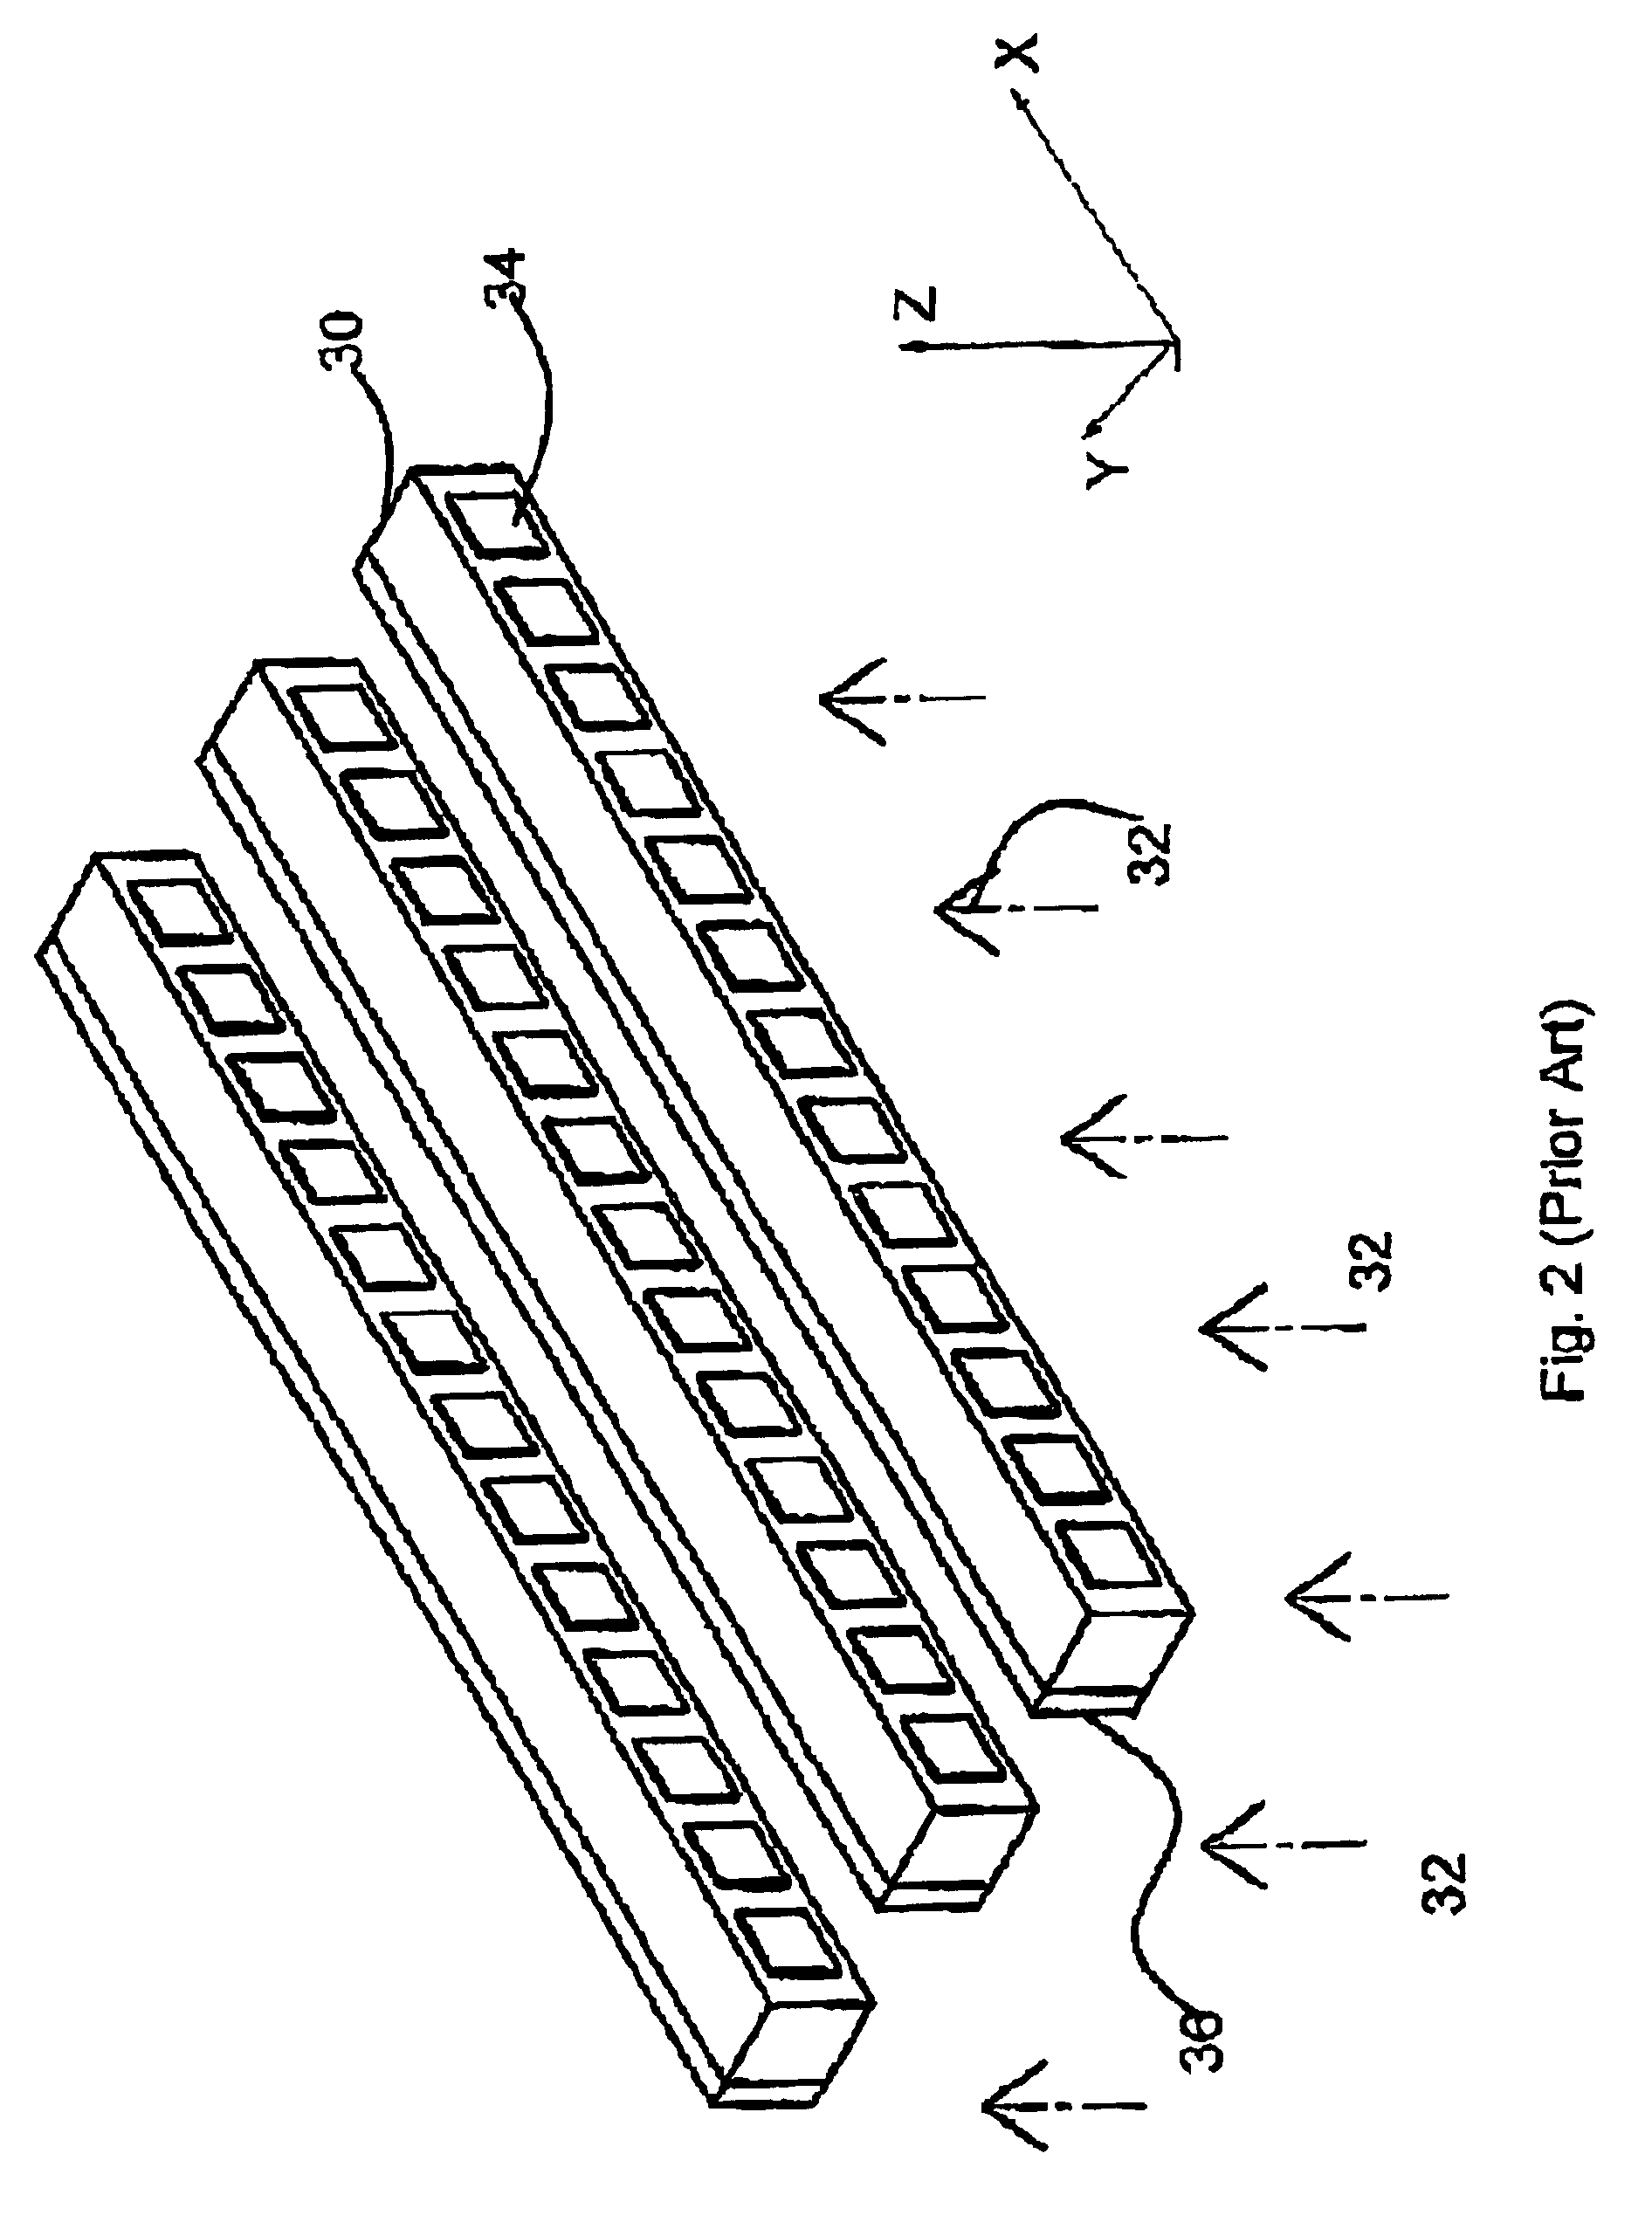 Two-dimensional radiation detector